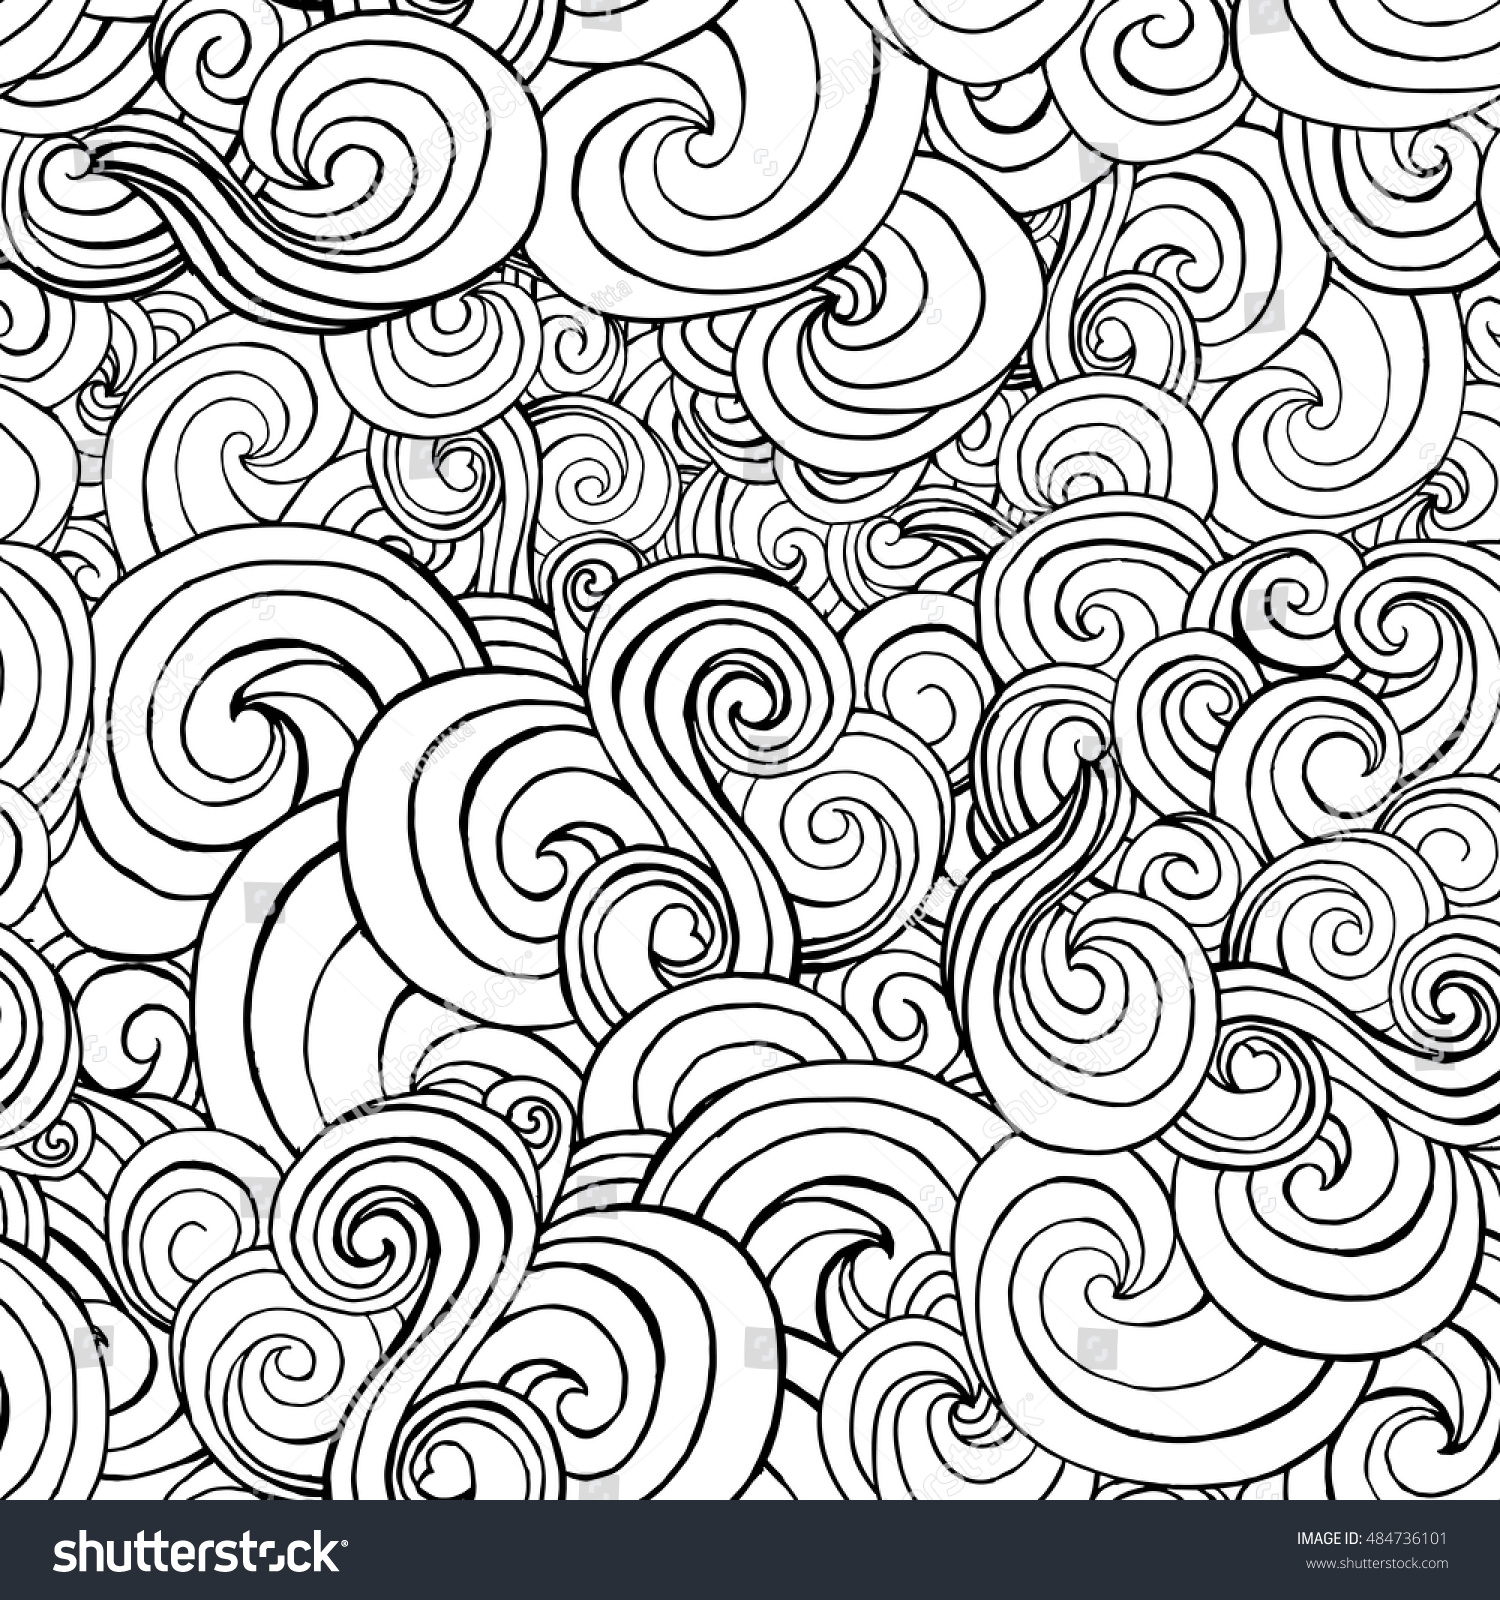 Seamless pattern coloring pages Images, Stock Photos & Vectors ...